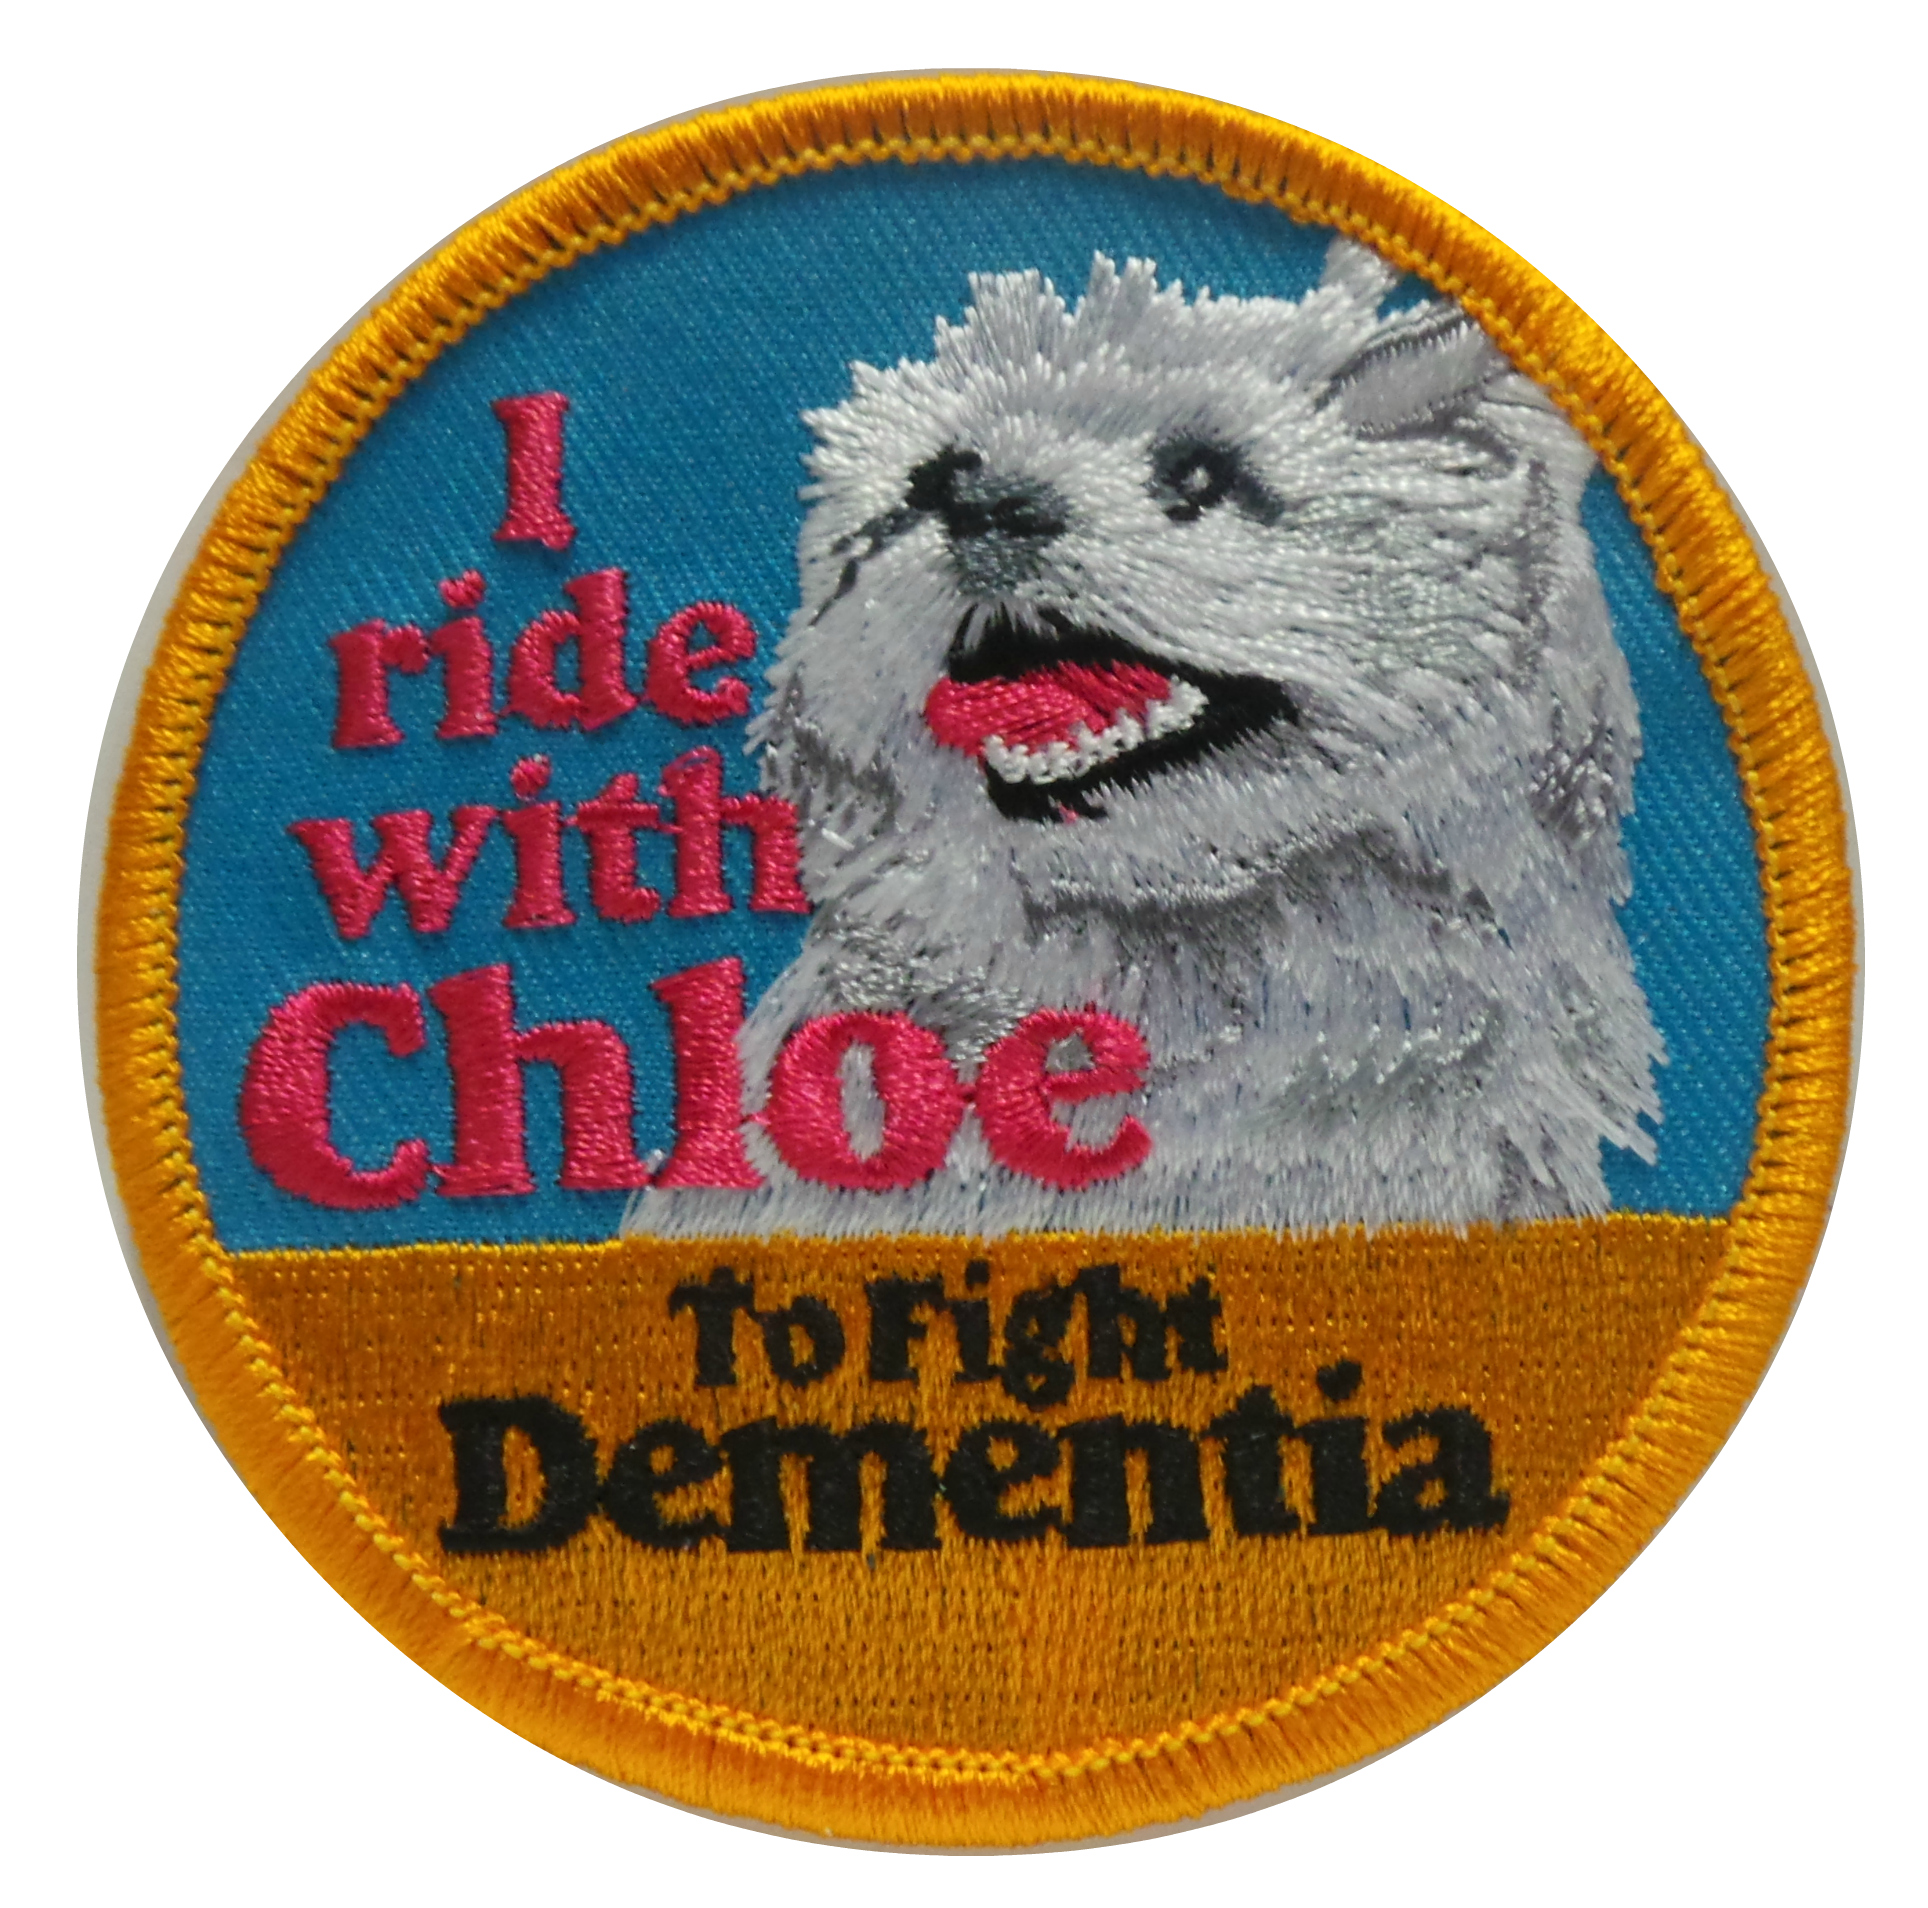 I Ride With Chloe Patch